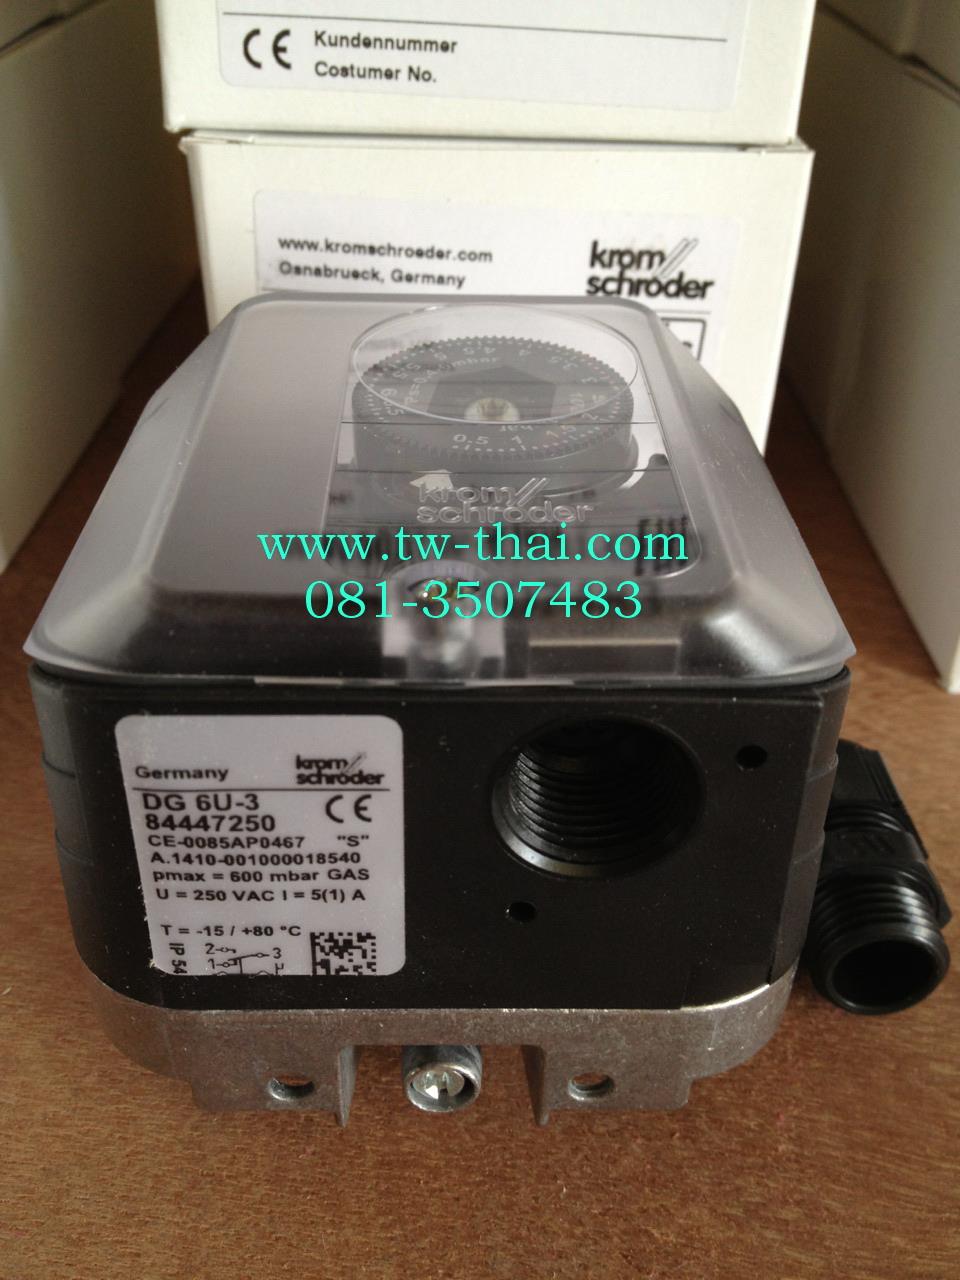 "kromschroeder" DG6U-3, DG10U-3, DG150U-3, DG500U-3,"Kromschroeder" DG6U-3, DG10U-3,kromschroder pressure switch,gas pressure switch,air pressure switch,"Krom schroder",Instruments and Controls/Switches